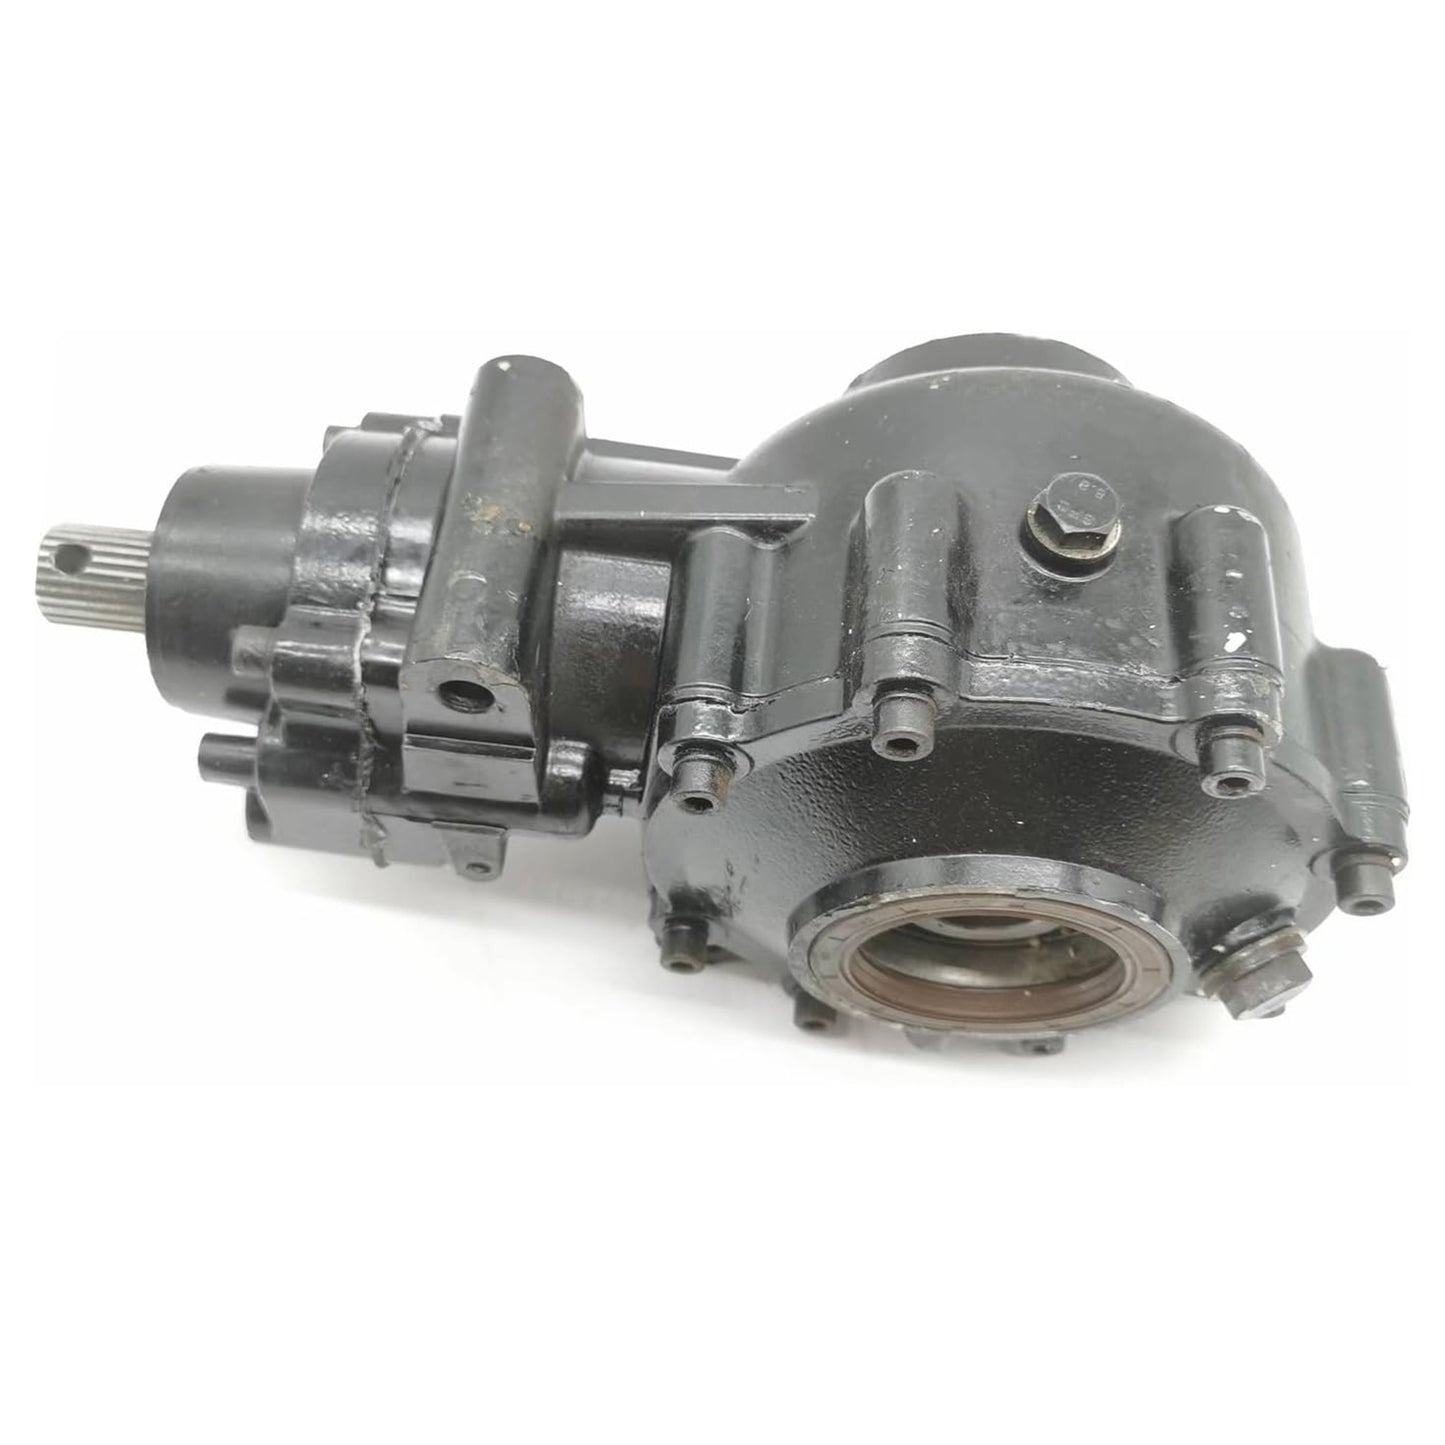 S650.03.02.03.00B Rear Differential Assembly Compatible with Joyner 650 commando rear